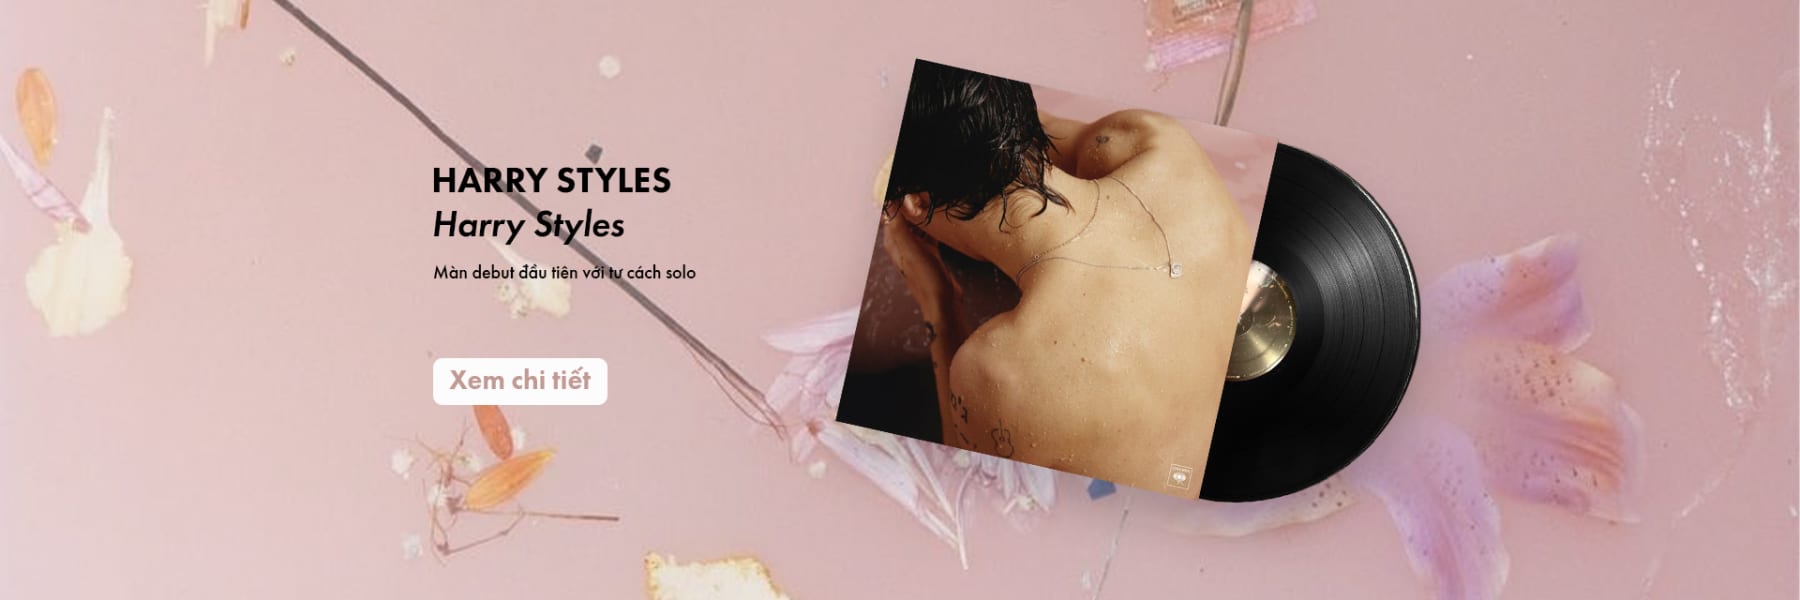 https://vocrecords.vn/product/on-the-run/new-this-week/harry-styles-harry-styles/